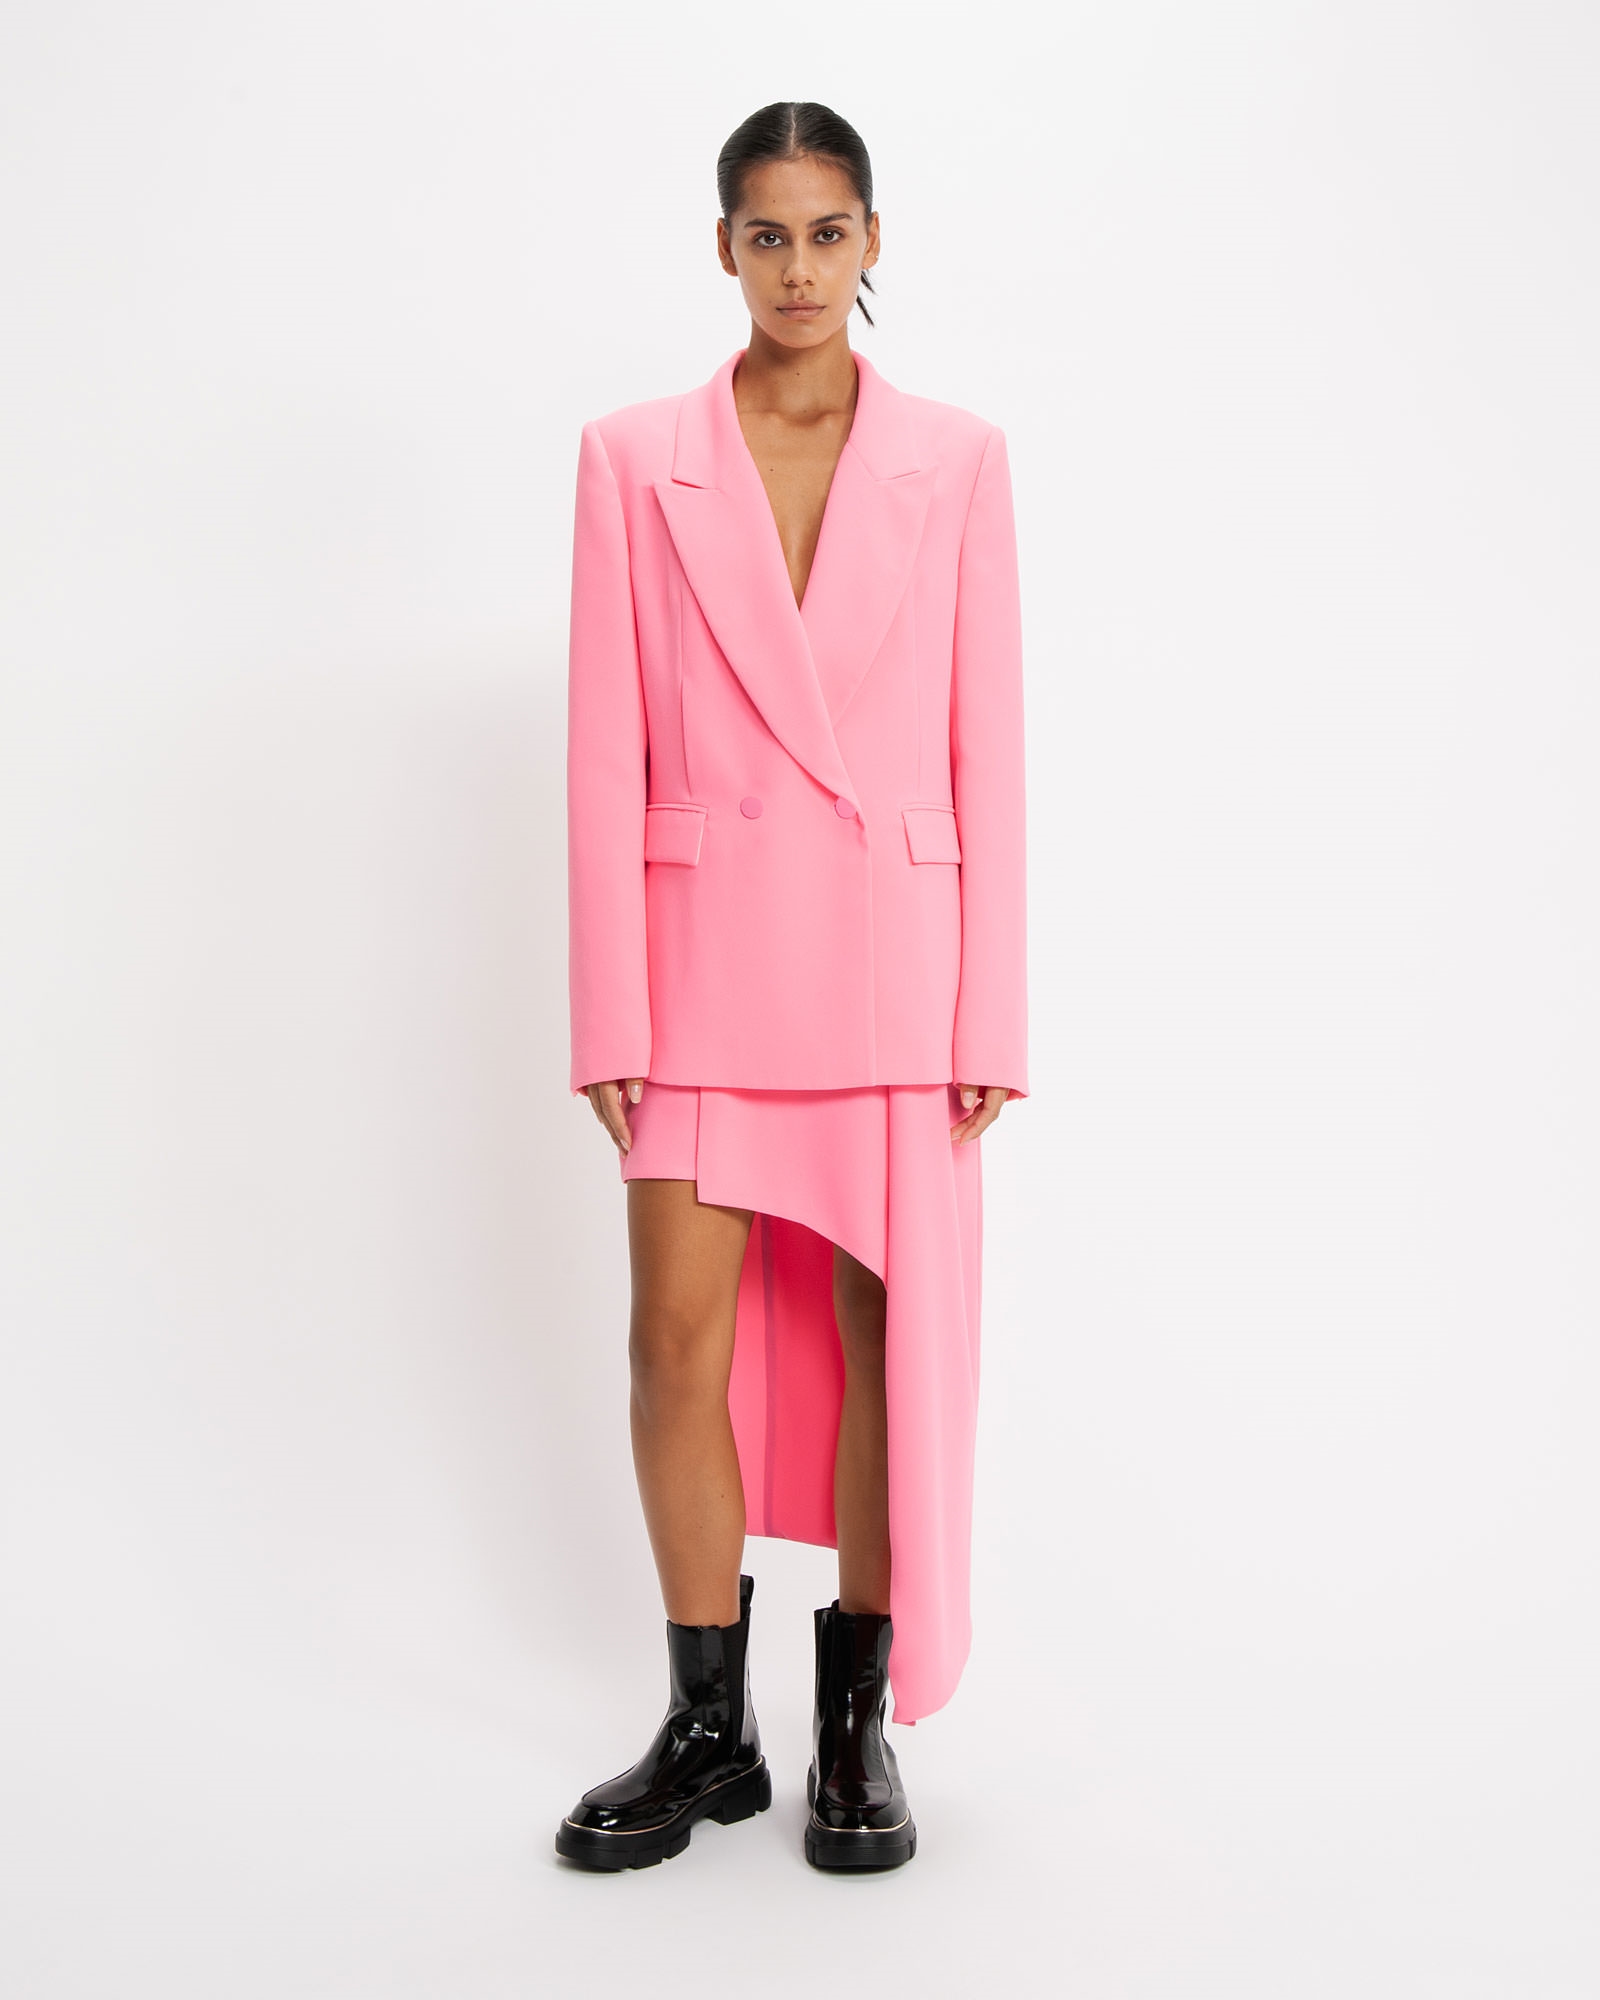 Neon Pink Double Breasted Blazer | Buy Jackets & Coats Online - Cue